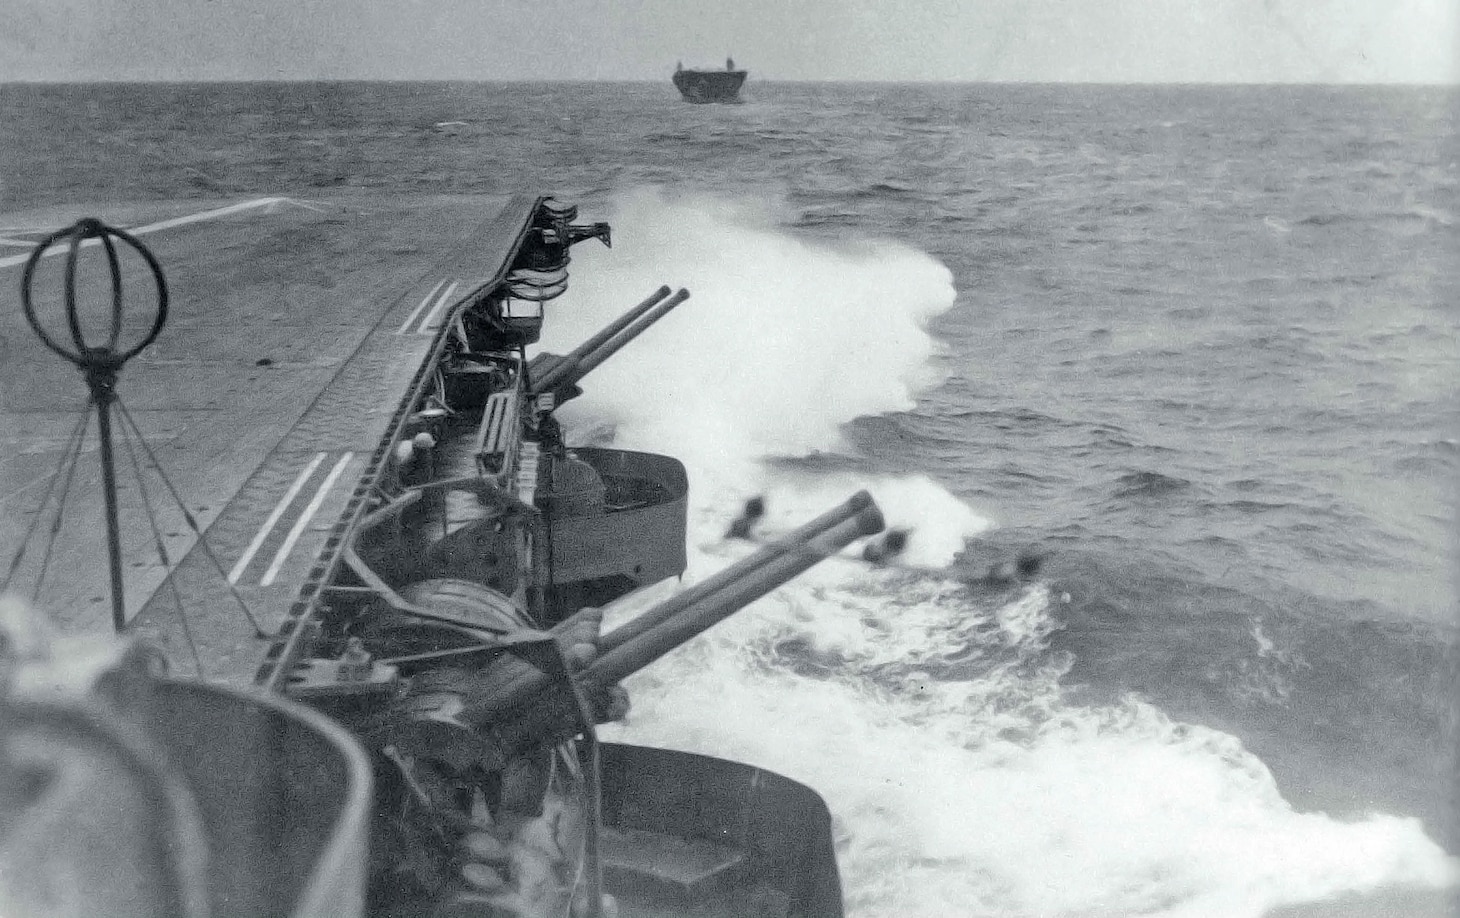 At sea in late November 1941, headed toward Pearl Harbor, this photo taken from the carrier Zuikaku shows details also found on the Hiryu, including 12.7cm gun mounts.